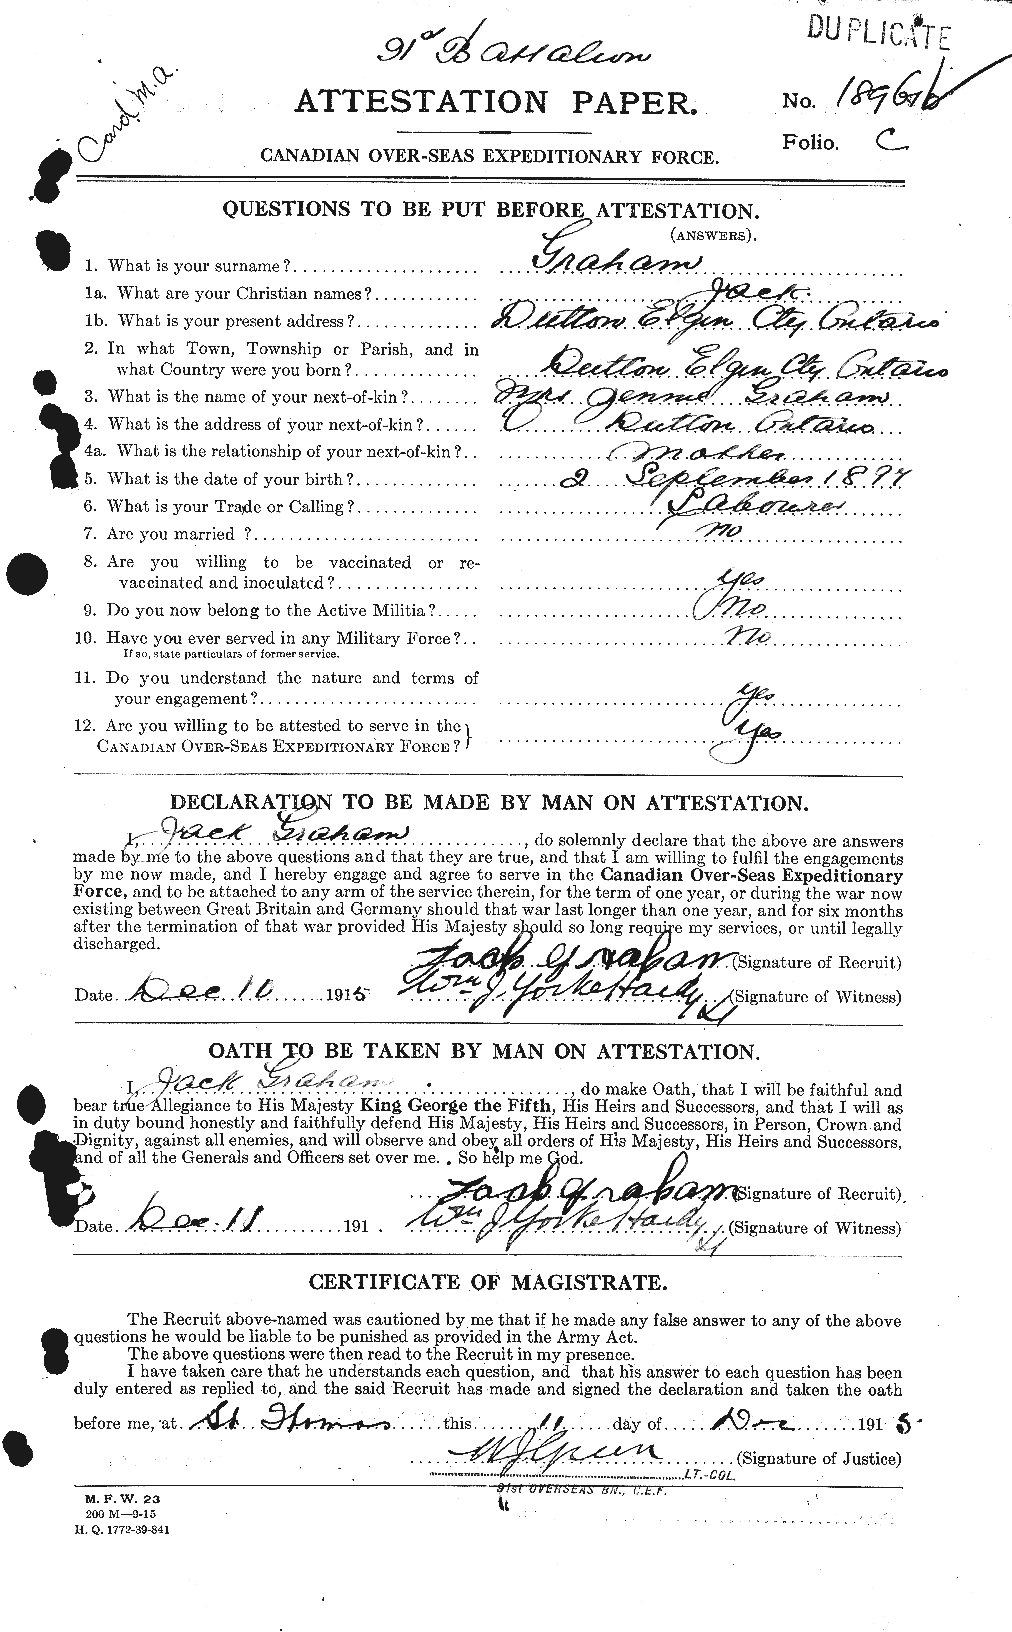 Personnel Records of the First World War - CEF 357772a